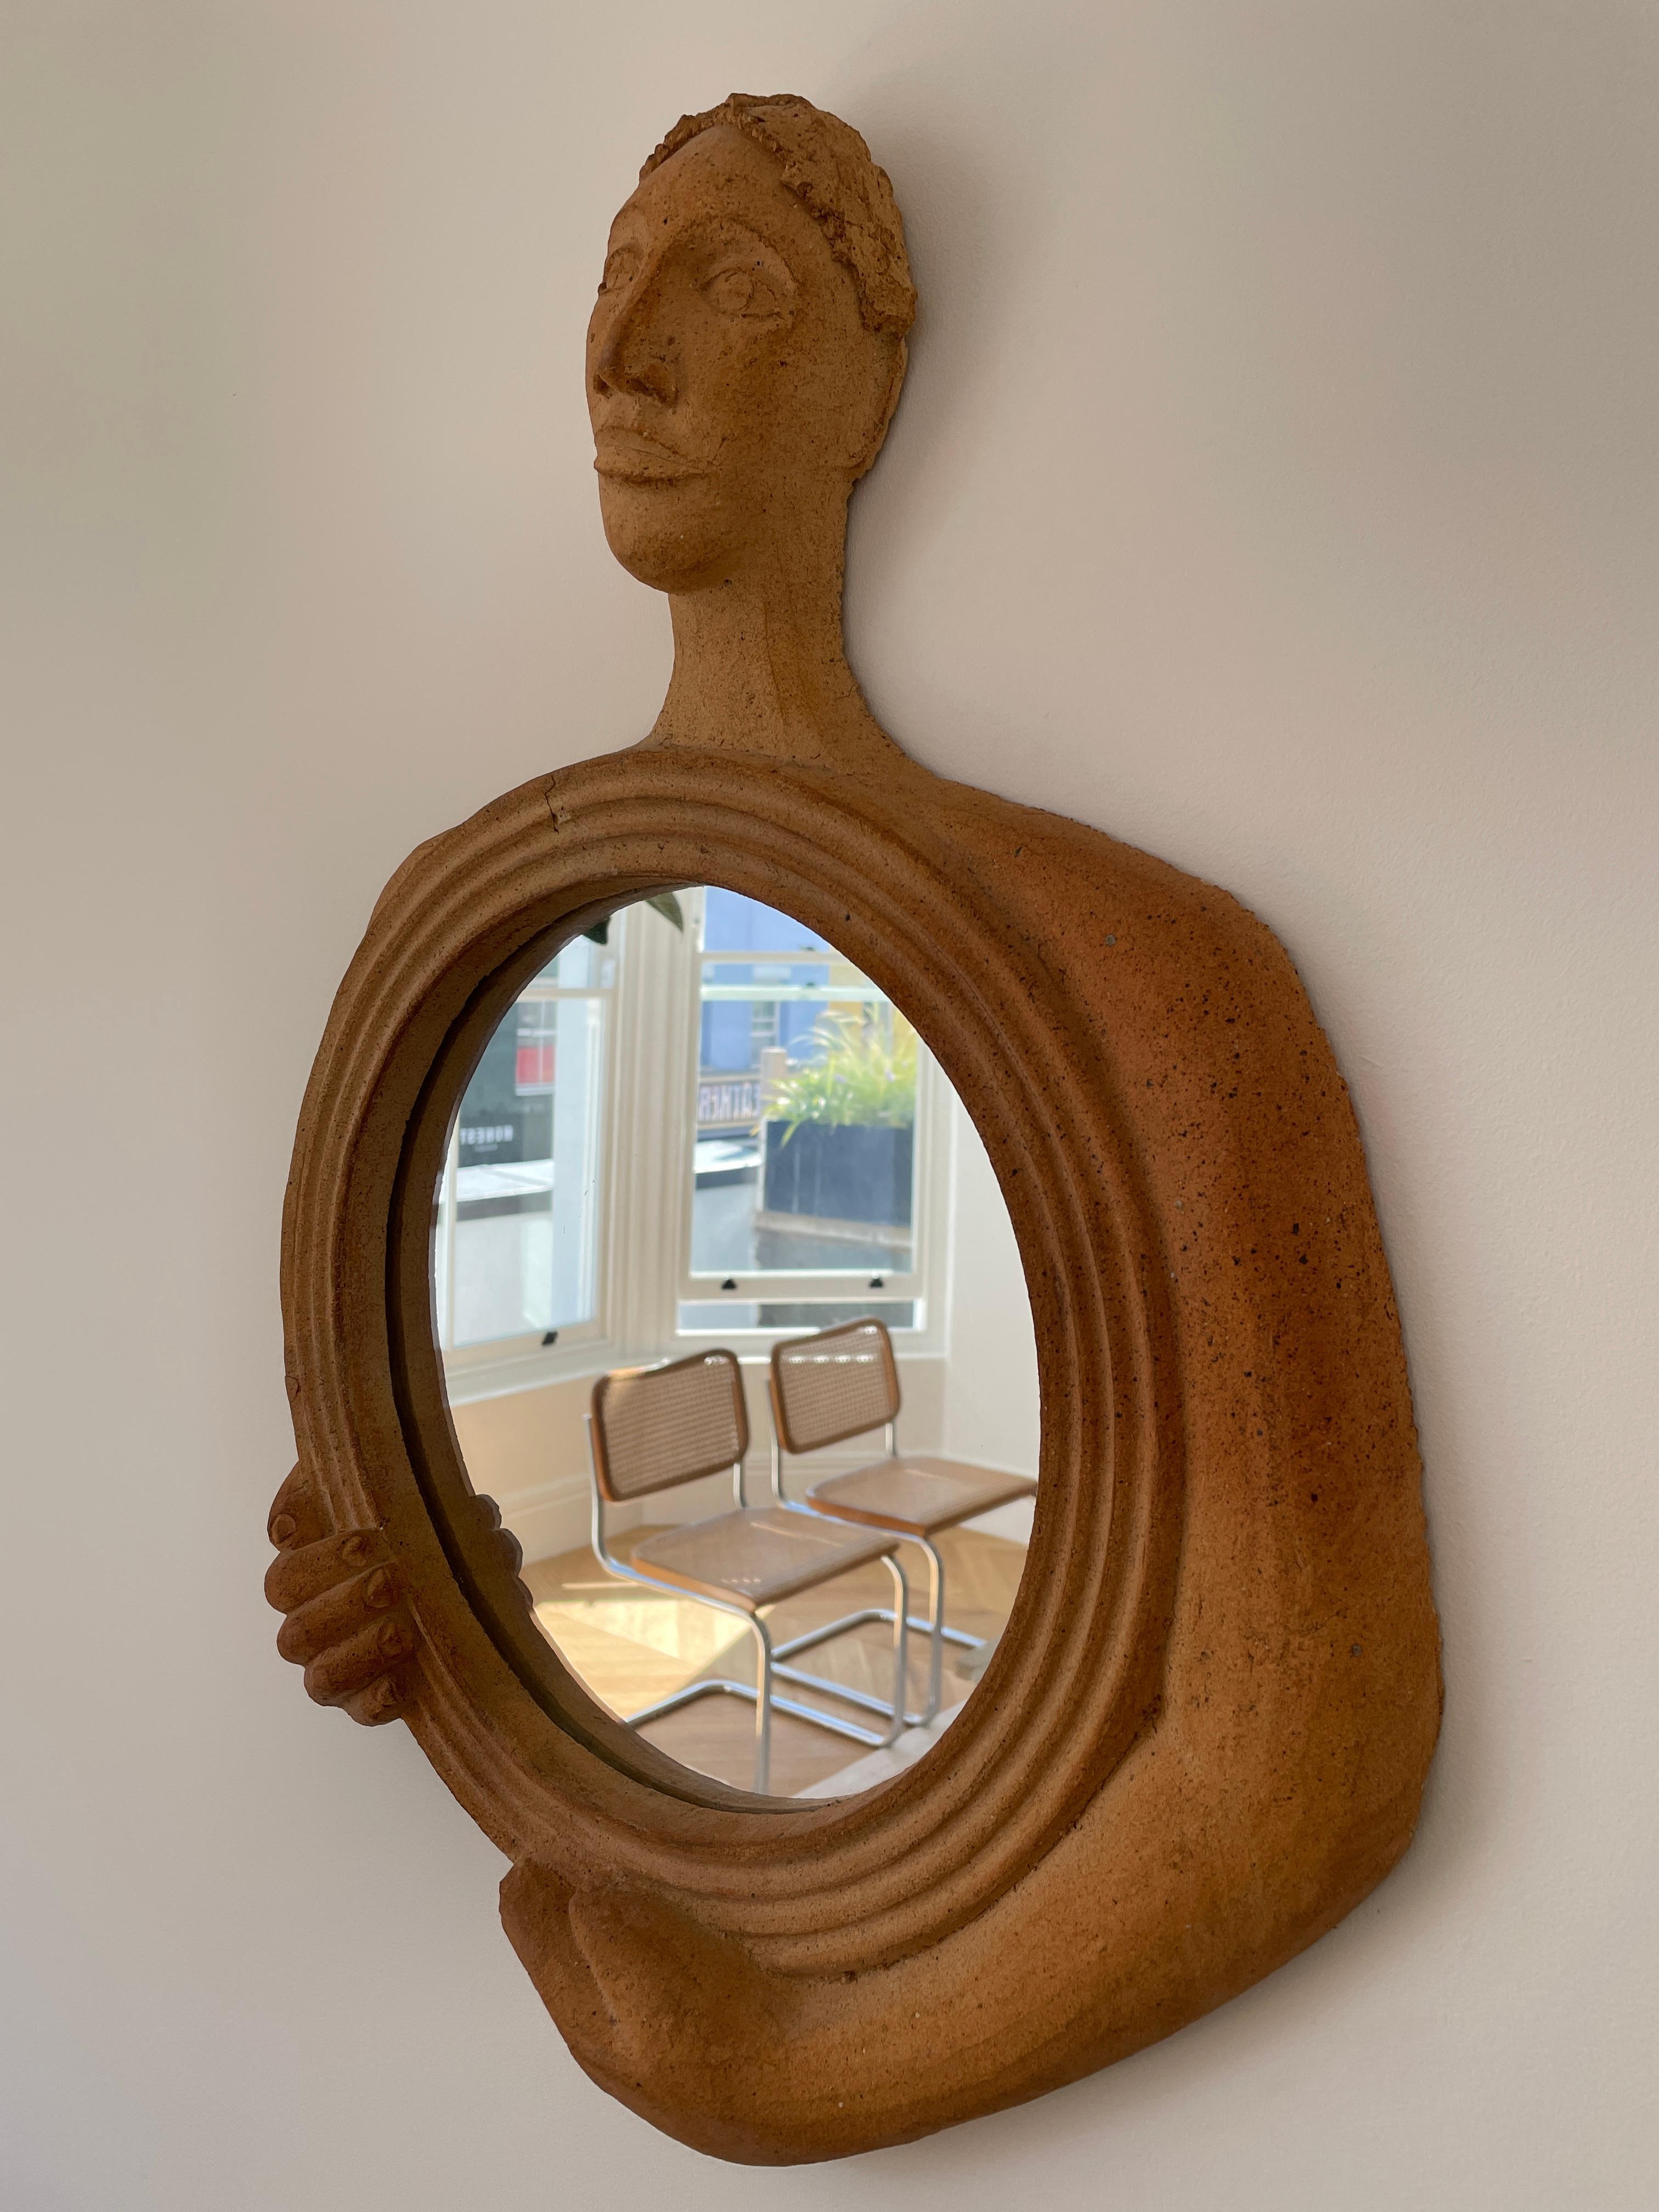 Height: 57cm
Width: 42cm
Depth: 9cm

Designer: Gabriel Sébastien Simonet
Date: 1950s
Materials: Chamotte clay, glass

Description: This beautifully inviting mirror is formed figure gently holding the mirror glass. It has the wonderful feature of